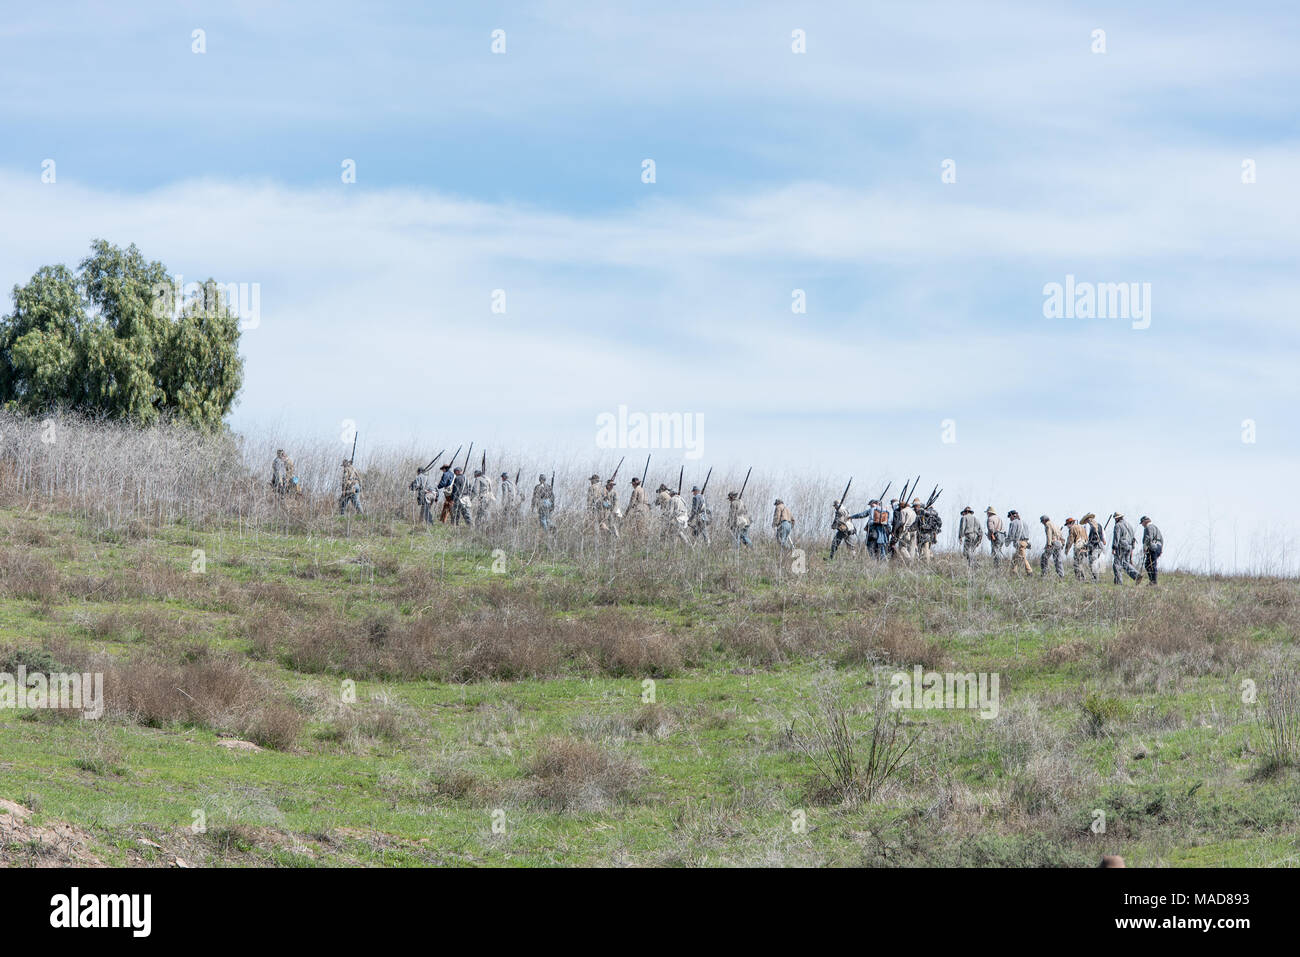 MOORPARK, CA - MARCH 18: The Blue and Gray Civil War Reenactment in Moorpark, CA is the largest battle reenactment west of the Mississippi. Stock Photo